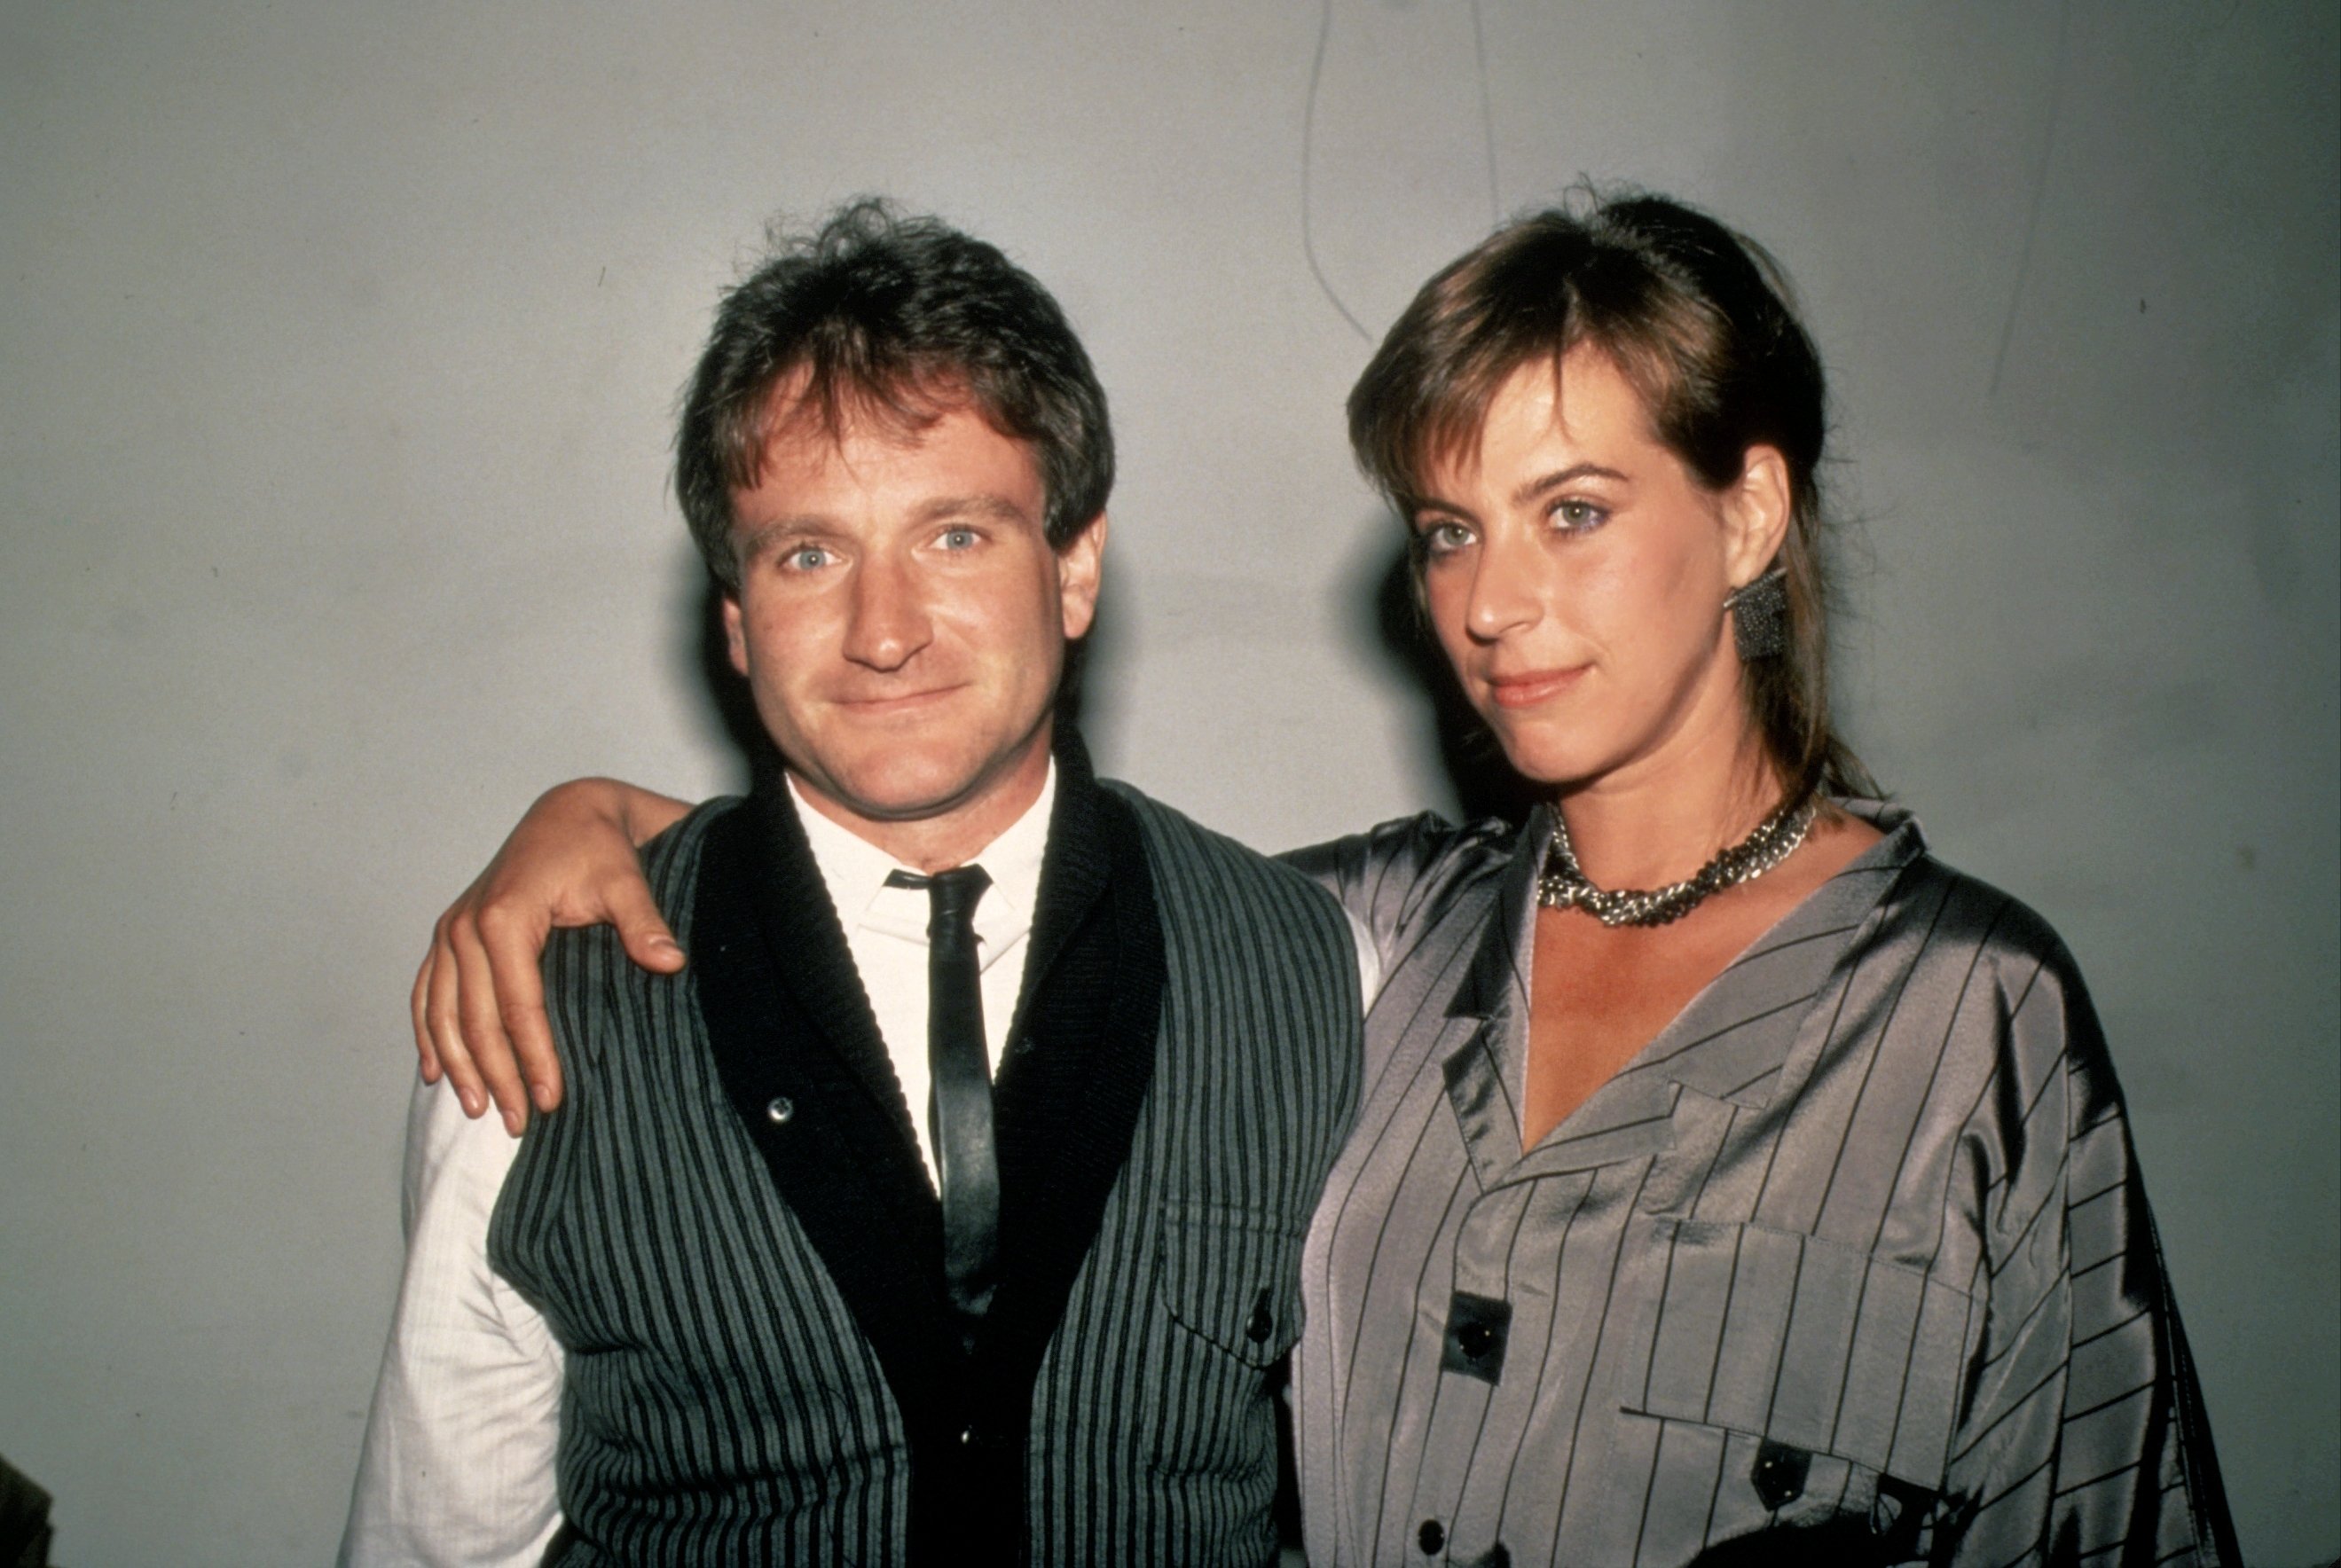 Actor Robin Williams and his wife Valerie Velardi pictured in 1984 in New York ┃Source: Getty Images